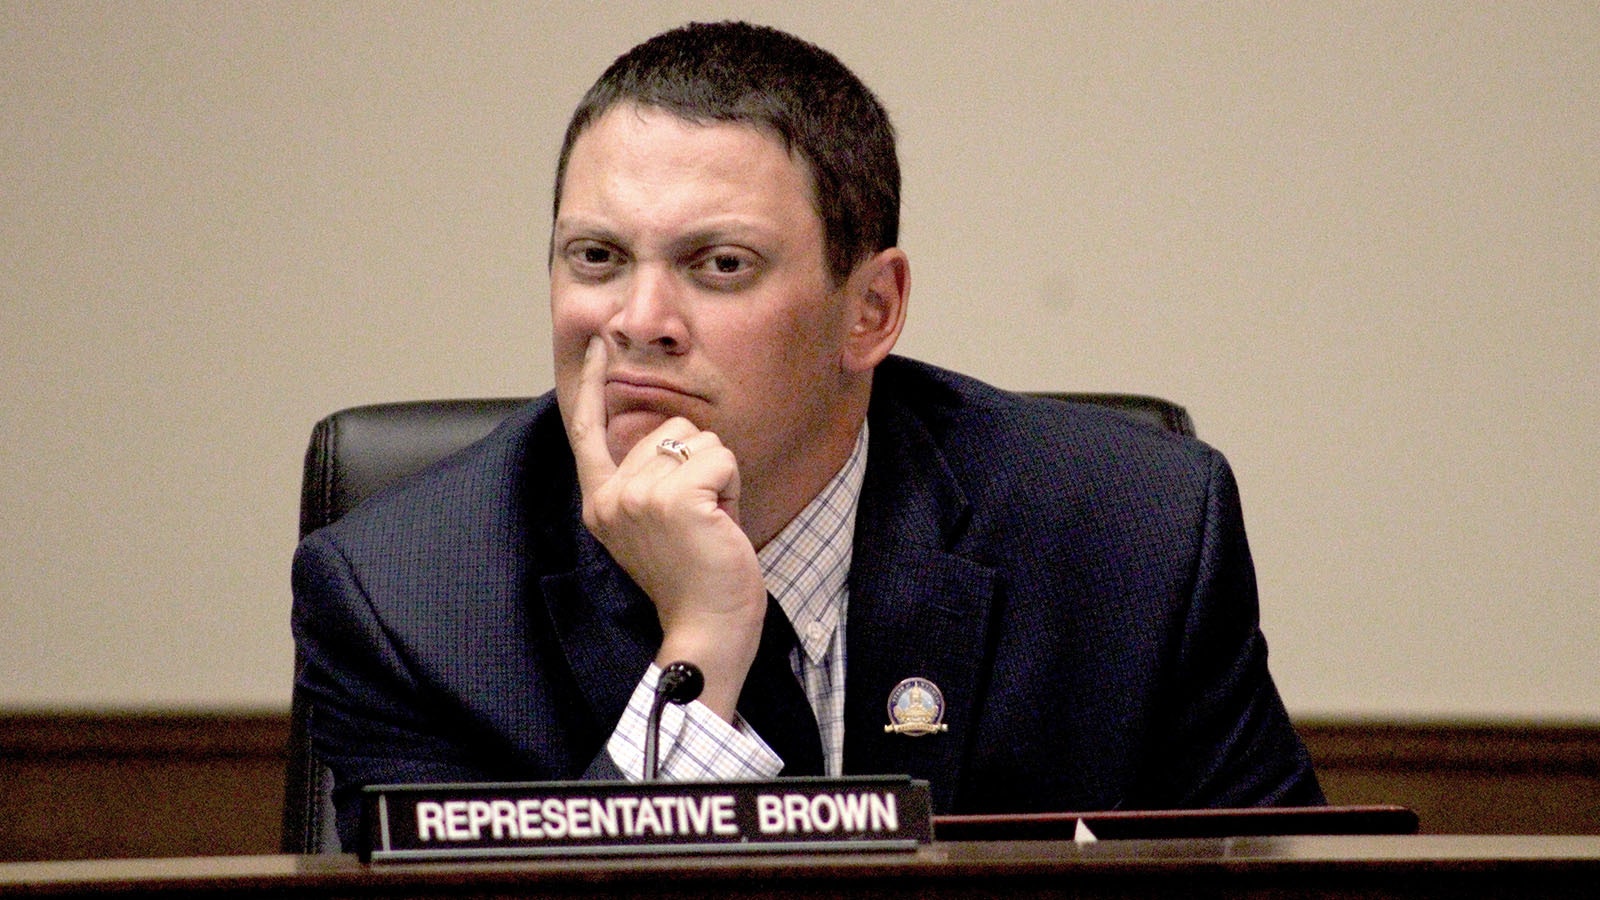 Rep. Landon Brown, R-Cheyenne, ponders a point made by someone during Tuesday's meeting.